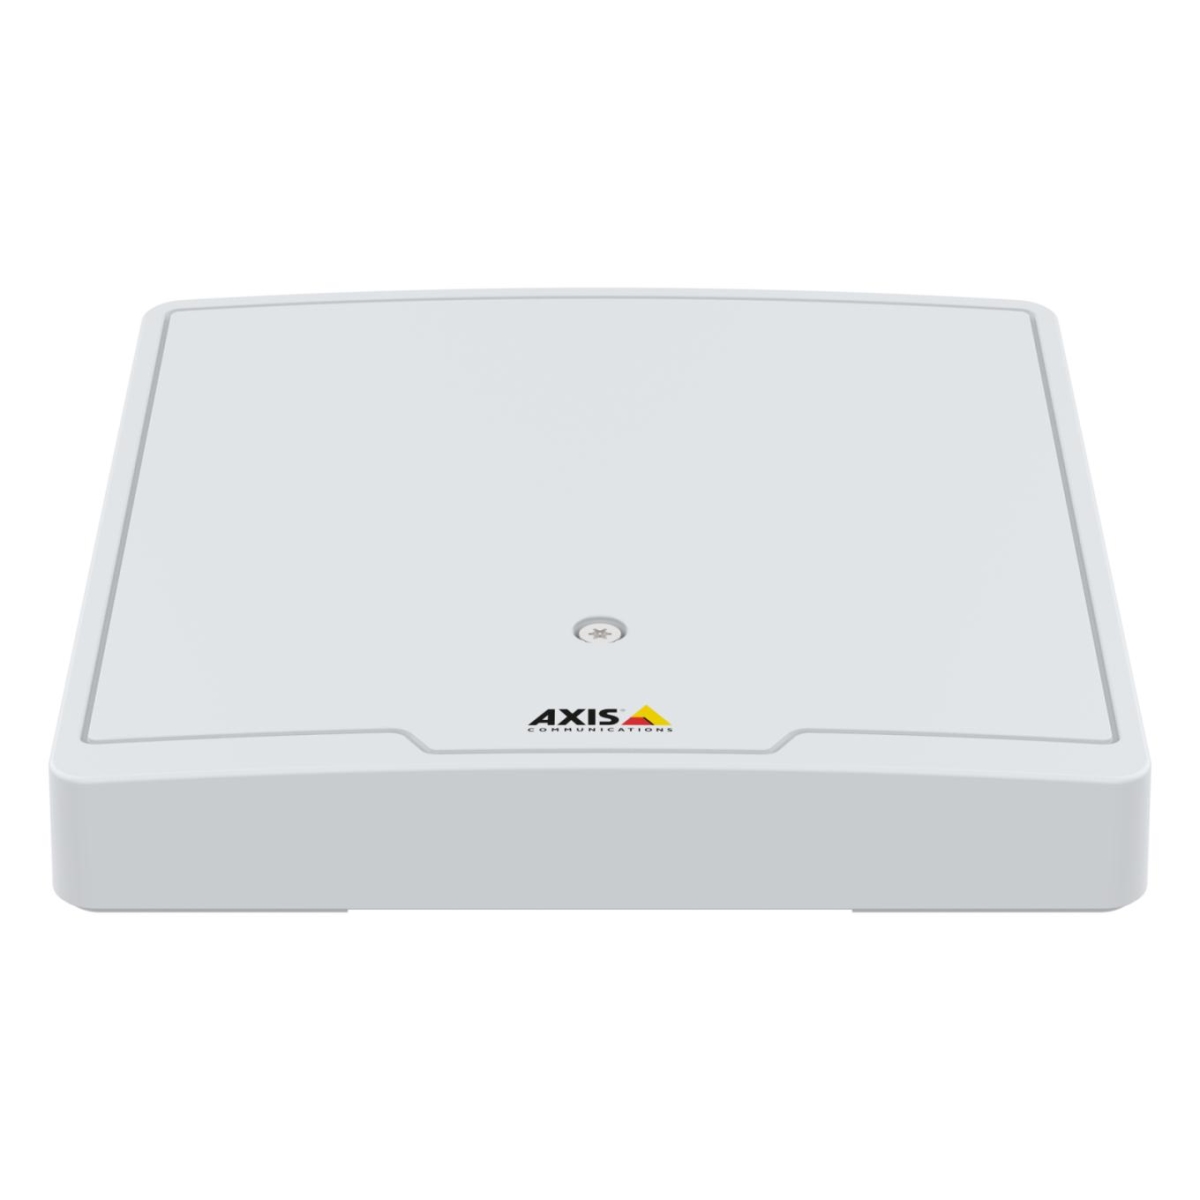 Picture of Axis 02699-001 Top Cover for A1610 & A1610-B Network Door Controller